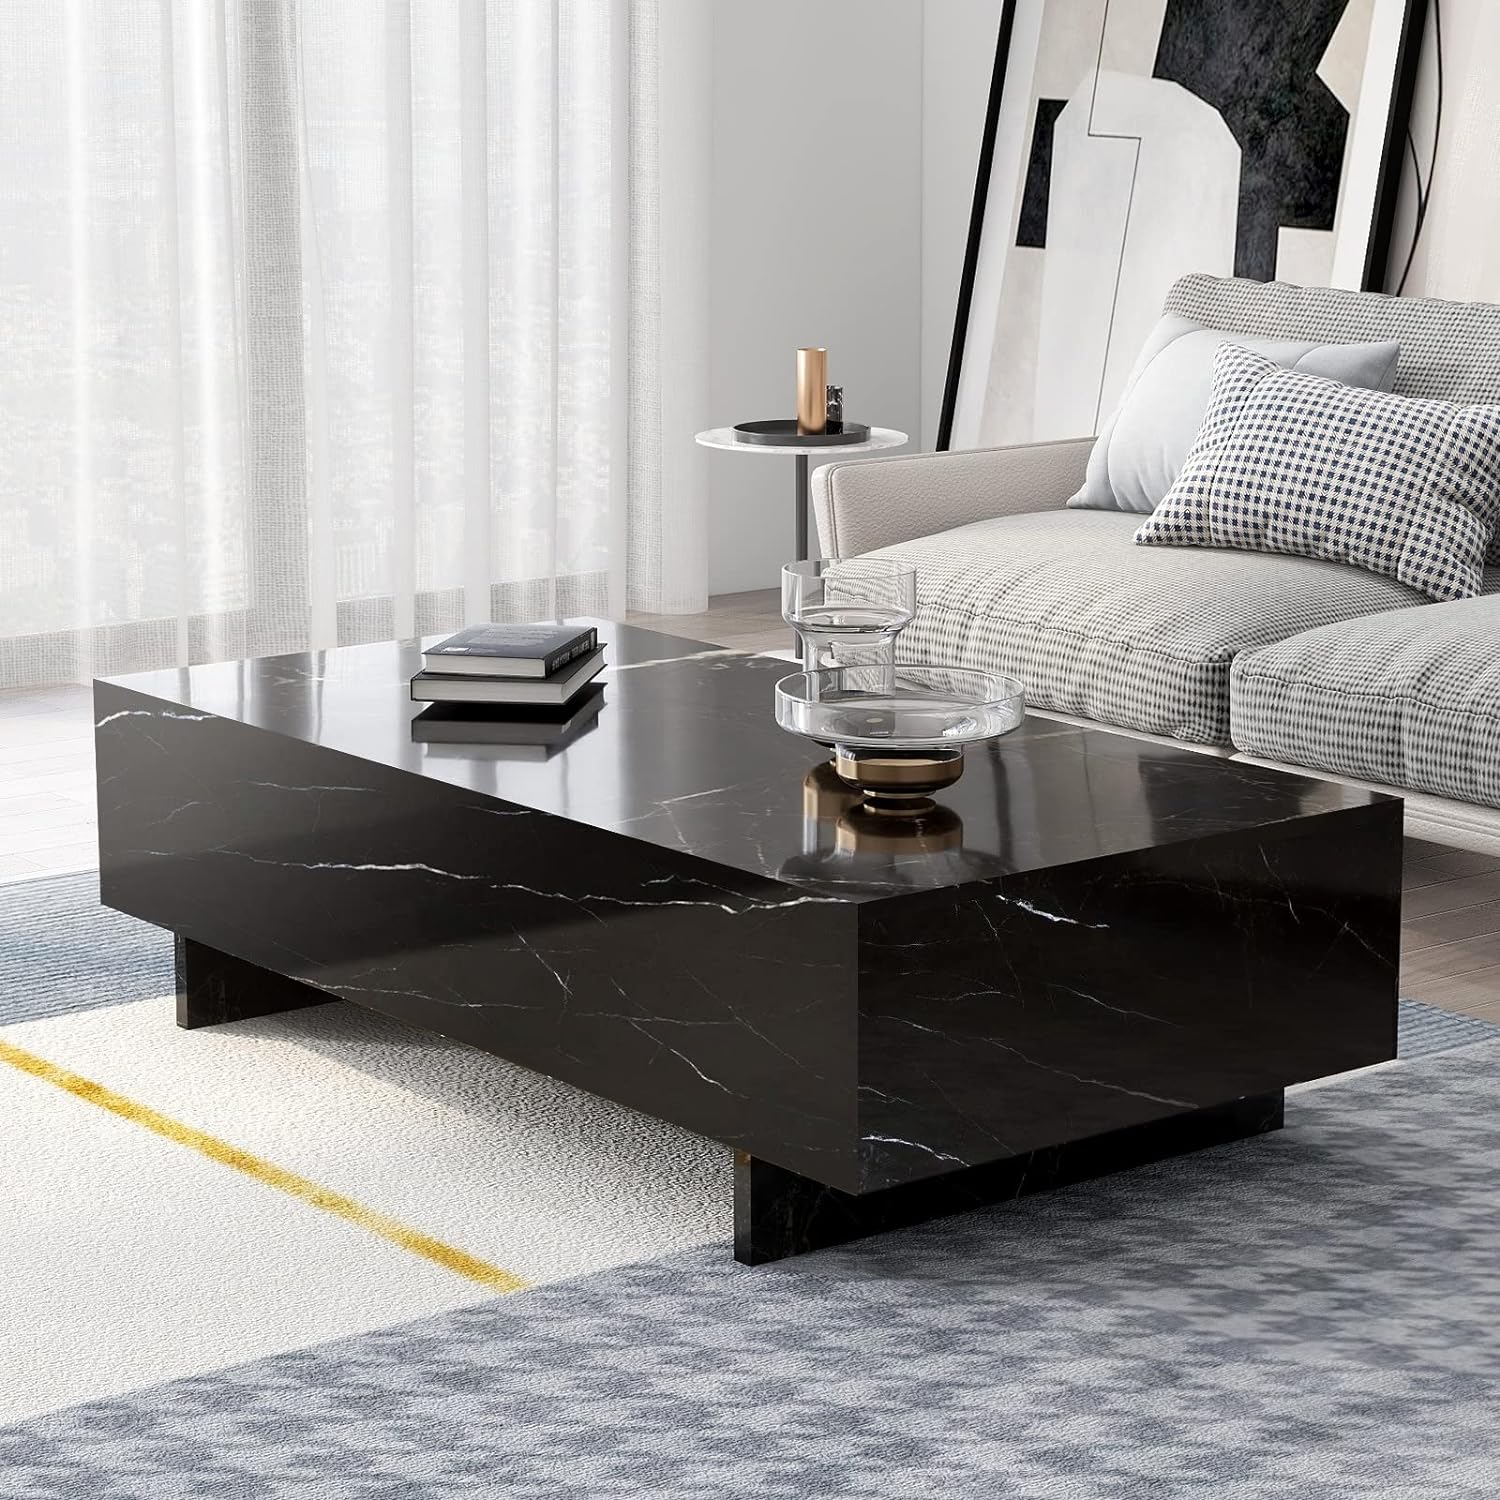 COSVALVE Marble Rectangle Coffee Tables for Living Room,Black Modern Side Table,Contemporary High Gloss Elegant Center Table for Waiting Area,41.3 Lx19.7 Wx13.8 H,Black